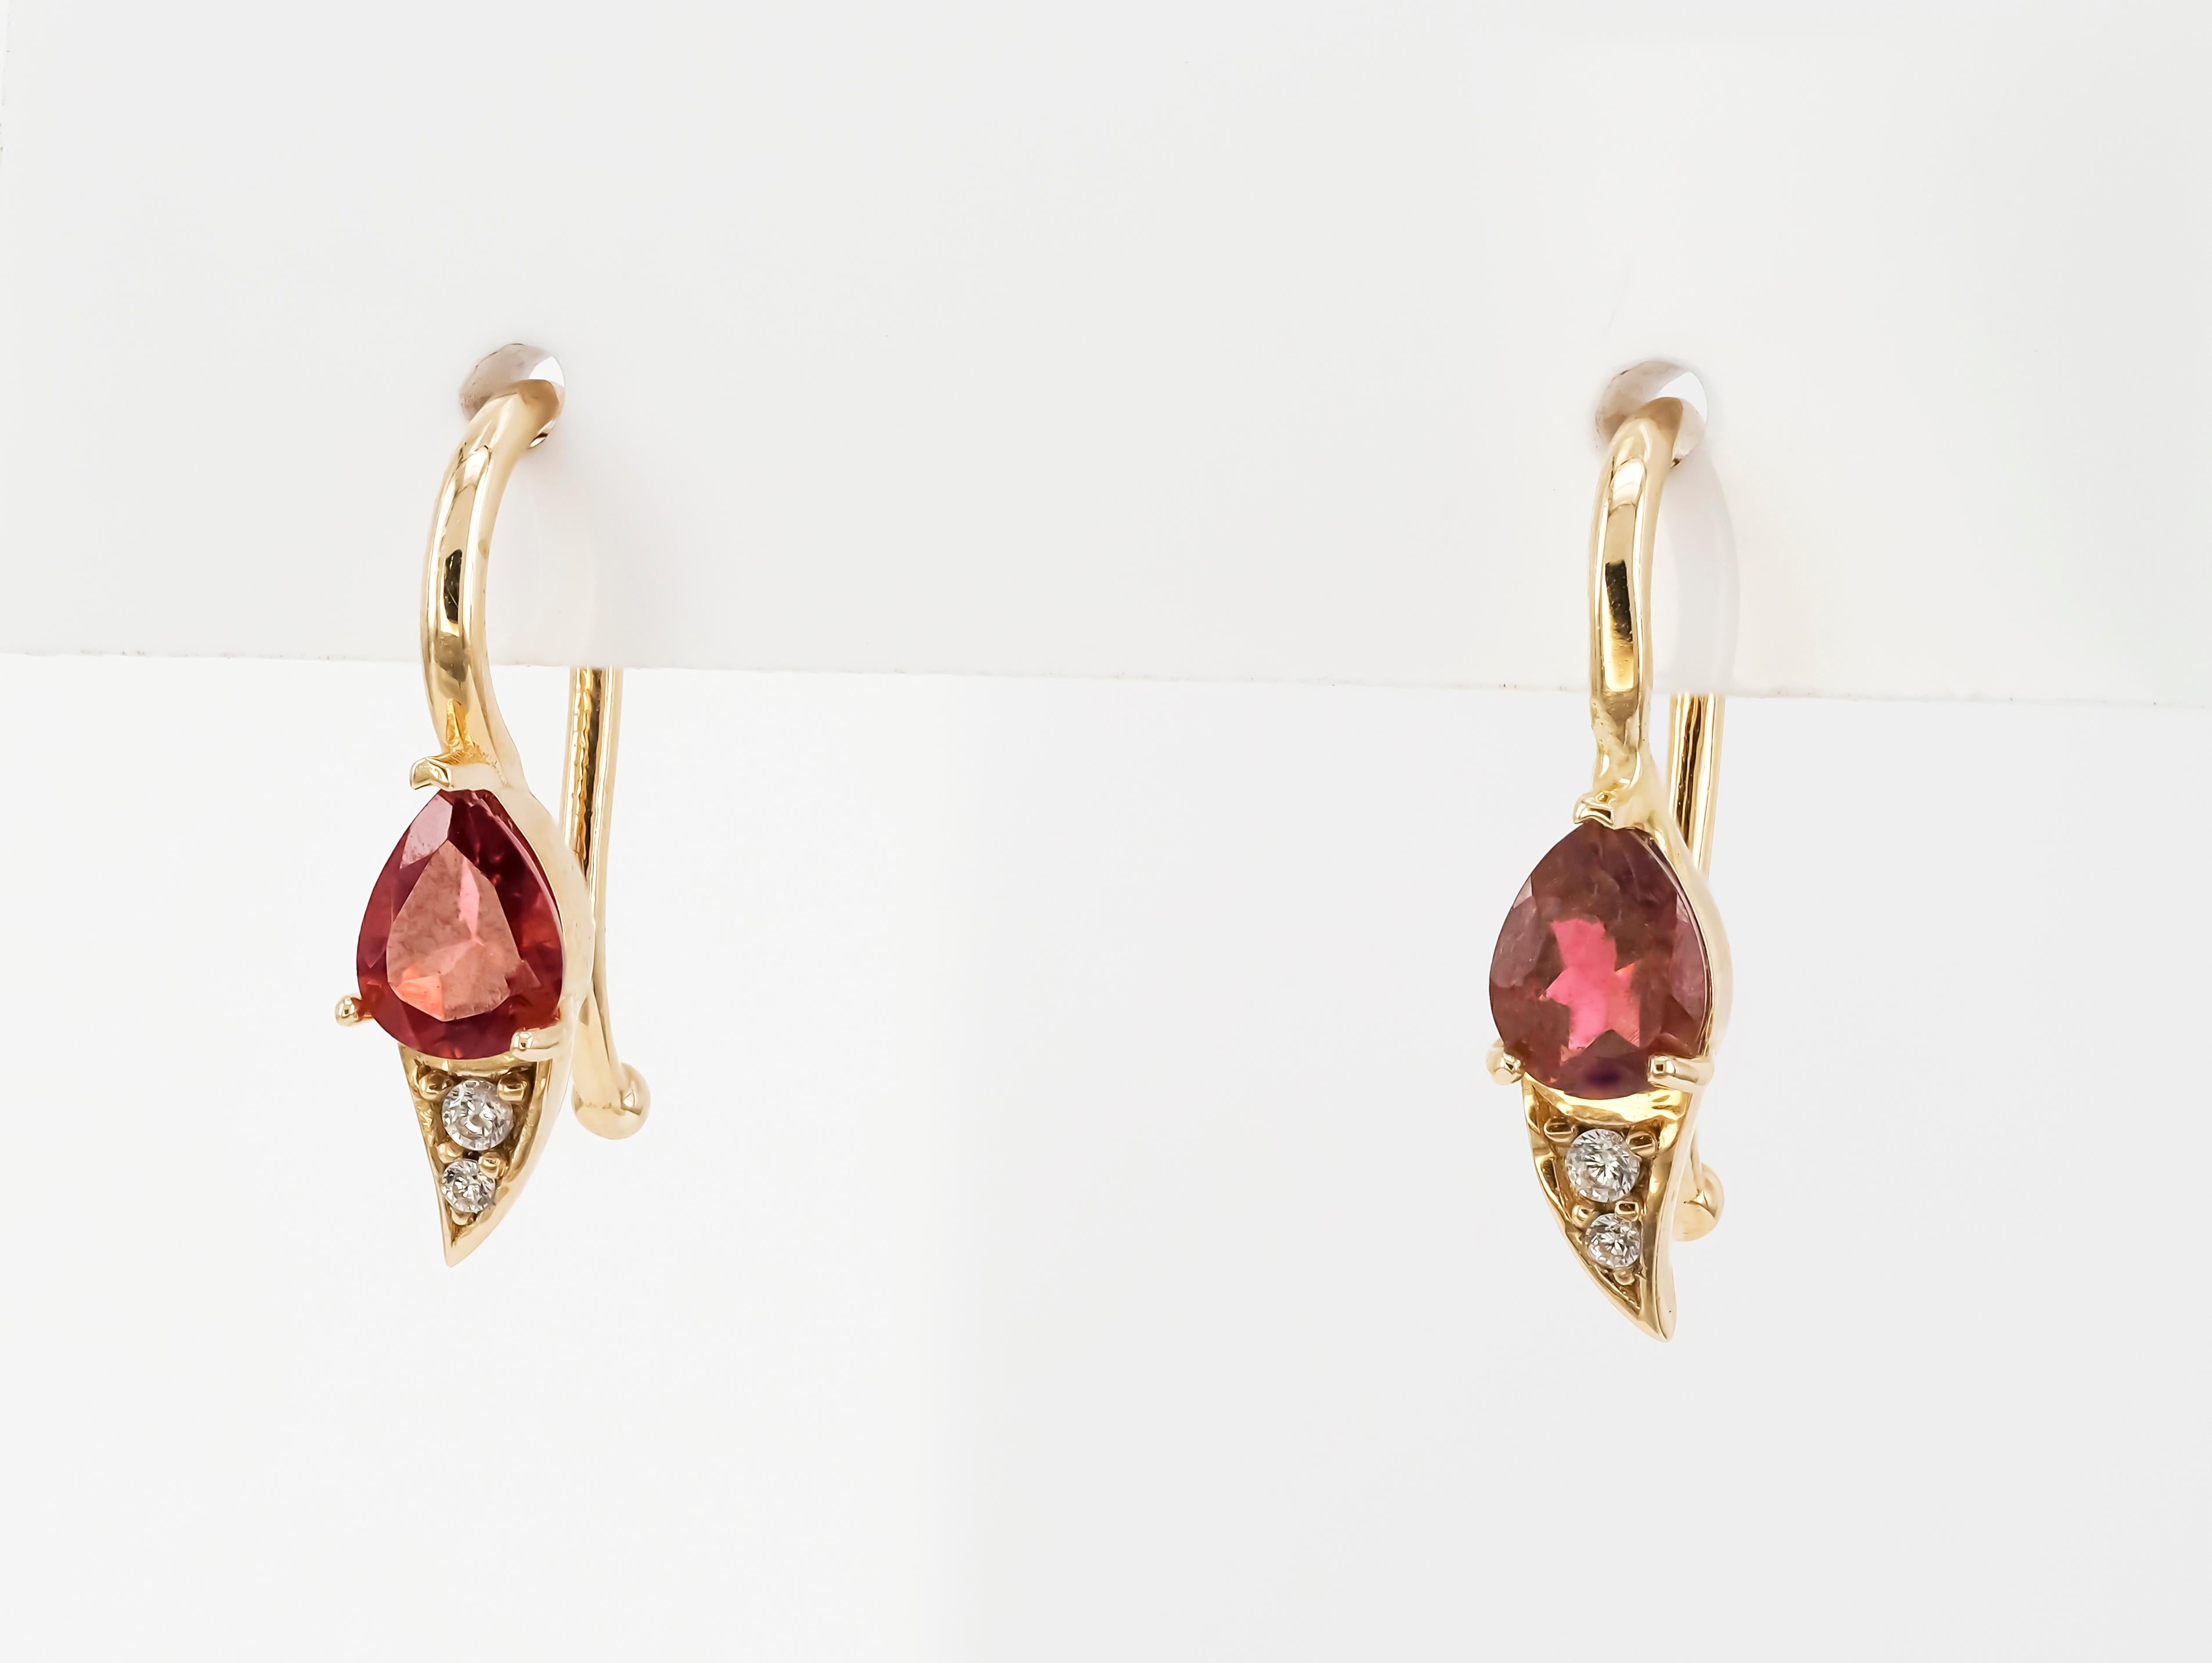 14 k yellow gold earrings with pear tourmalines and diamonds. Tiny gold earrings.

Metal: 14k yellow gold
Weight: 1.80 g.
Size: 16.5x4.5 mm
Set with tourmalines, color - pinkish red
Pear cut, 1.8 ct. in total.
Clarity: Transparent with